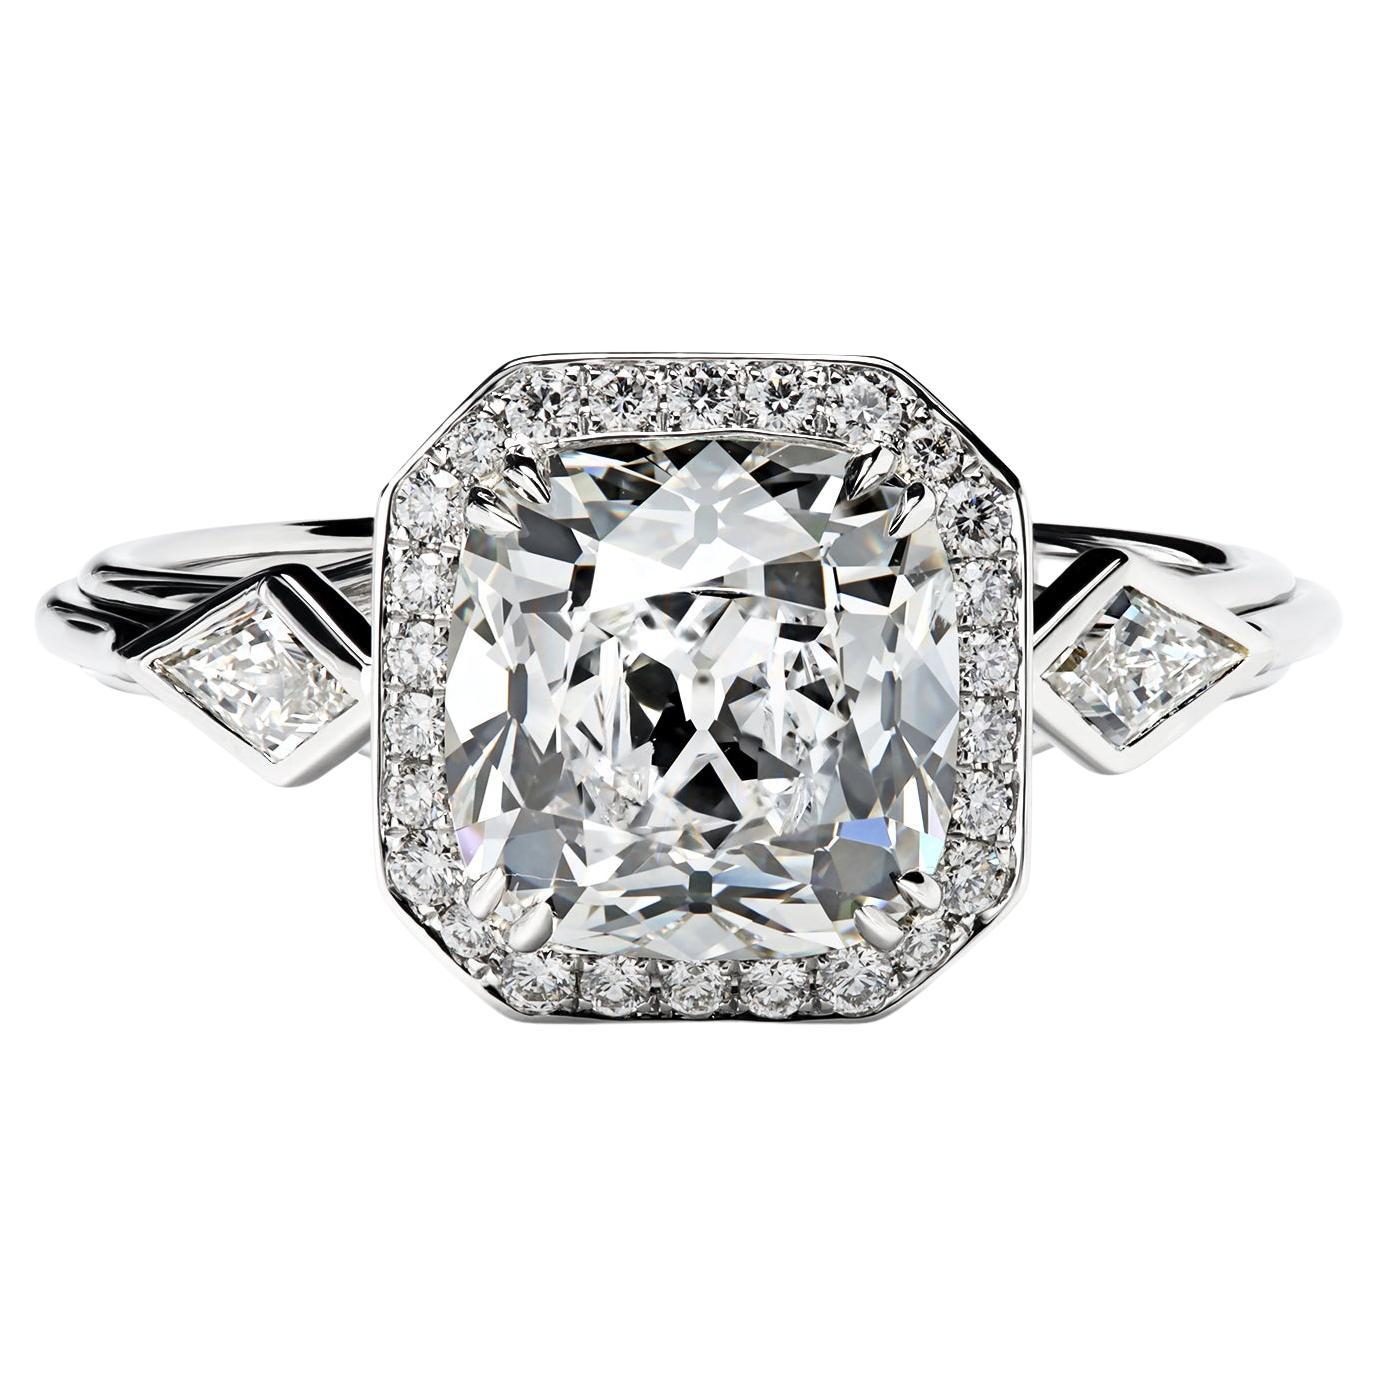 Leon Megé Art Deco style ajoured ring centering 3.01-carat F/VS2 natural True Antique™ cushion diamond; GIA #5221764825

This ring will be hand-forged in platinum. 
We guarantee the highest quality and precision. 
You will be amazed by our